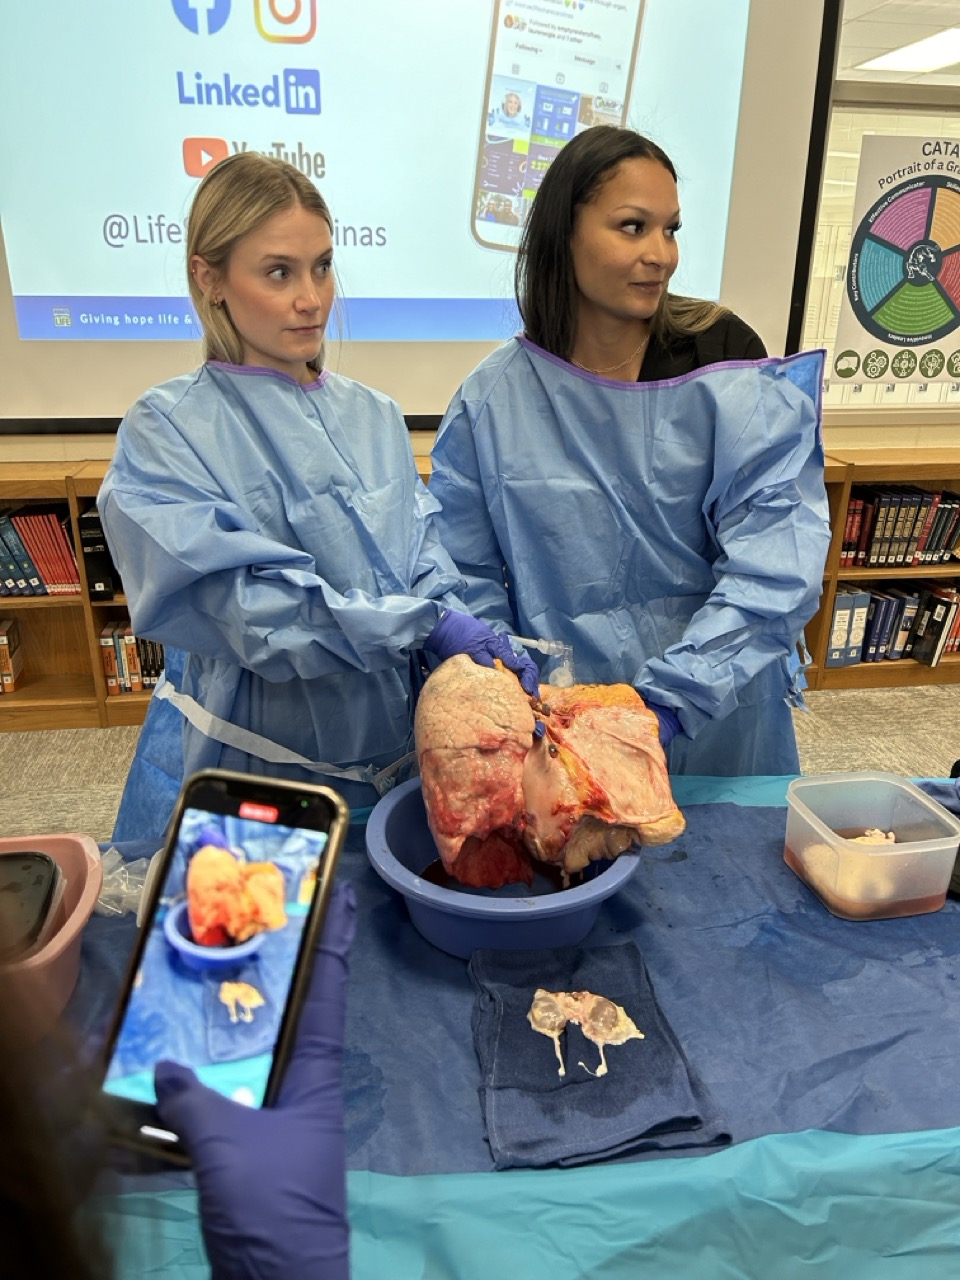 CATA Medical Students with organs